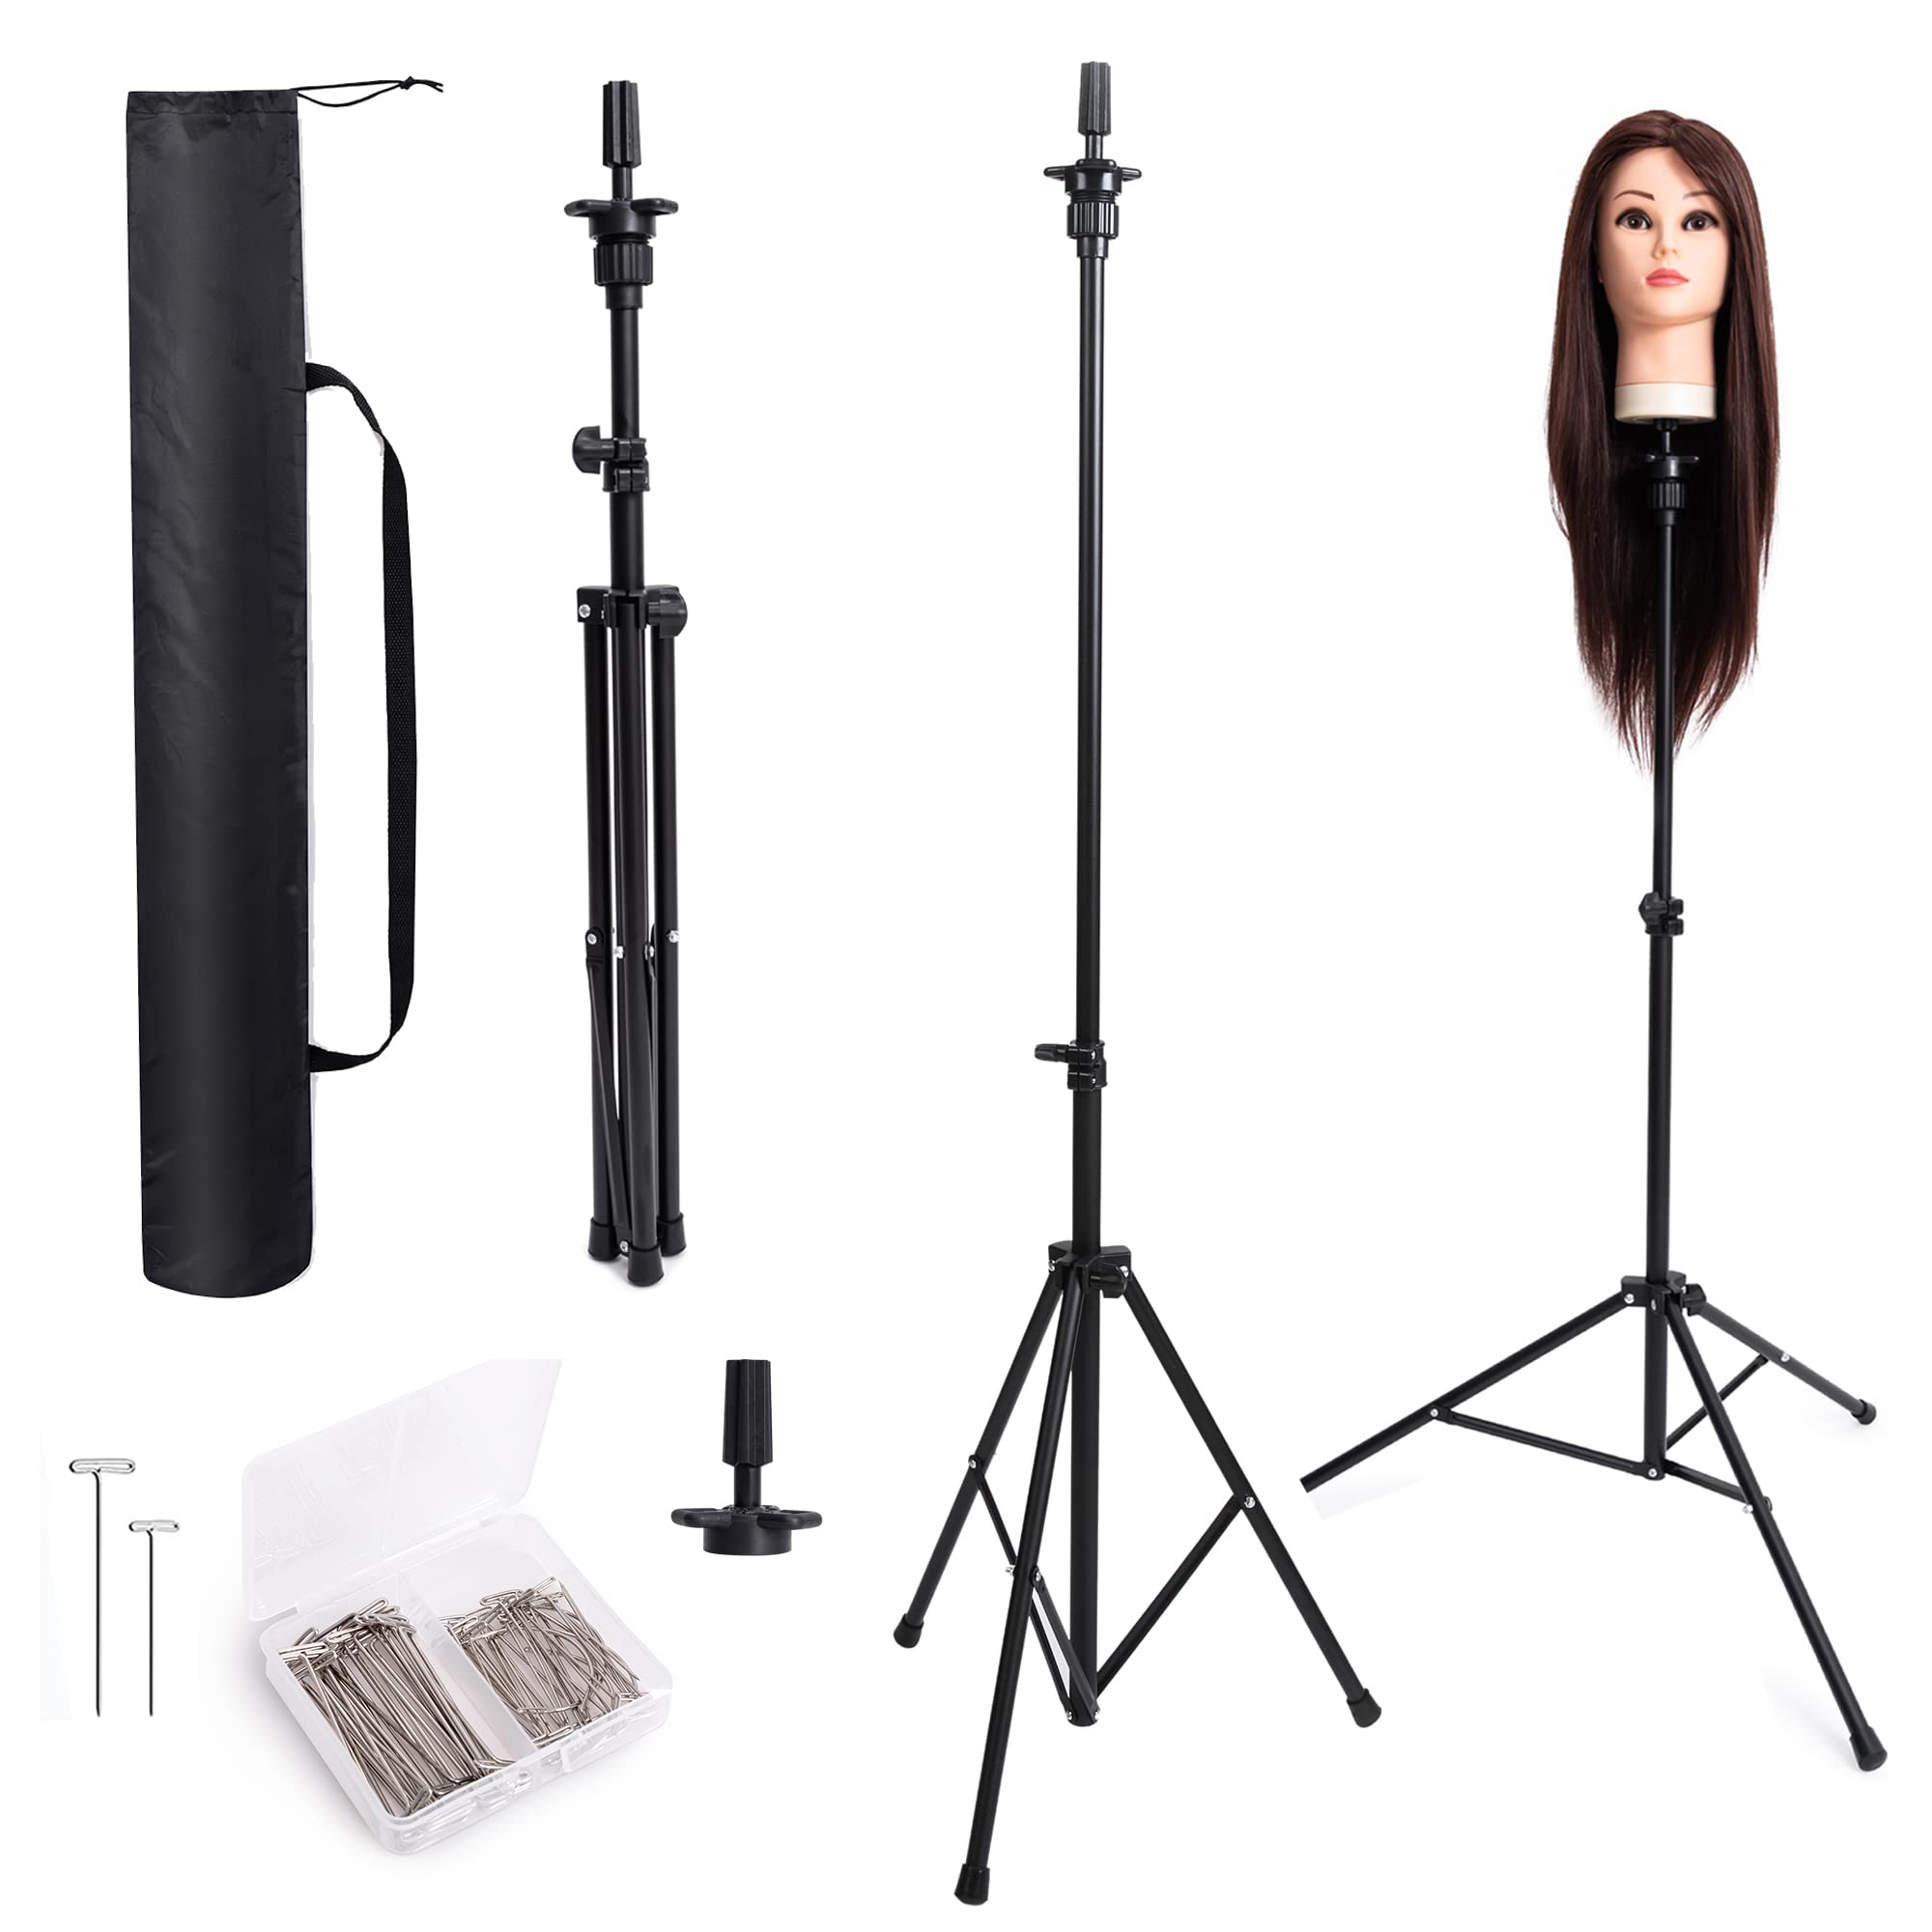 GOODOFFER PLACE Wig Head Stand Metal Mannequin Head Tripod Stand Adjustable  with Carrying Bag,30pc T-PIN for Maniquins Head Manikin Head Training  Canvas Block Head Hairextension Cosmetology Light Black